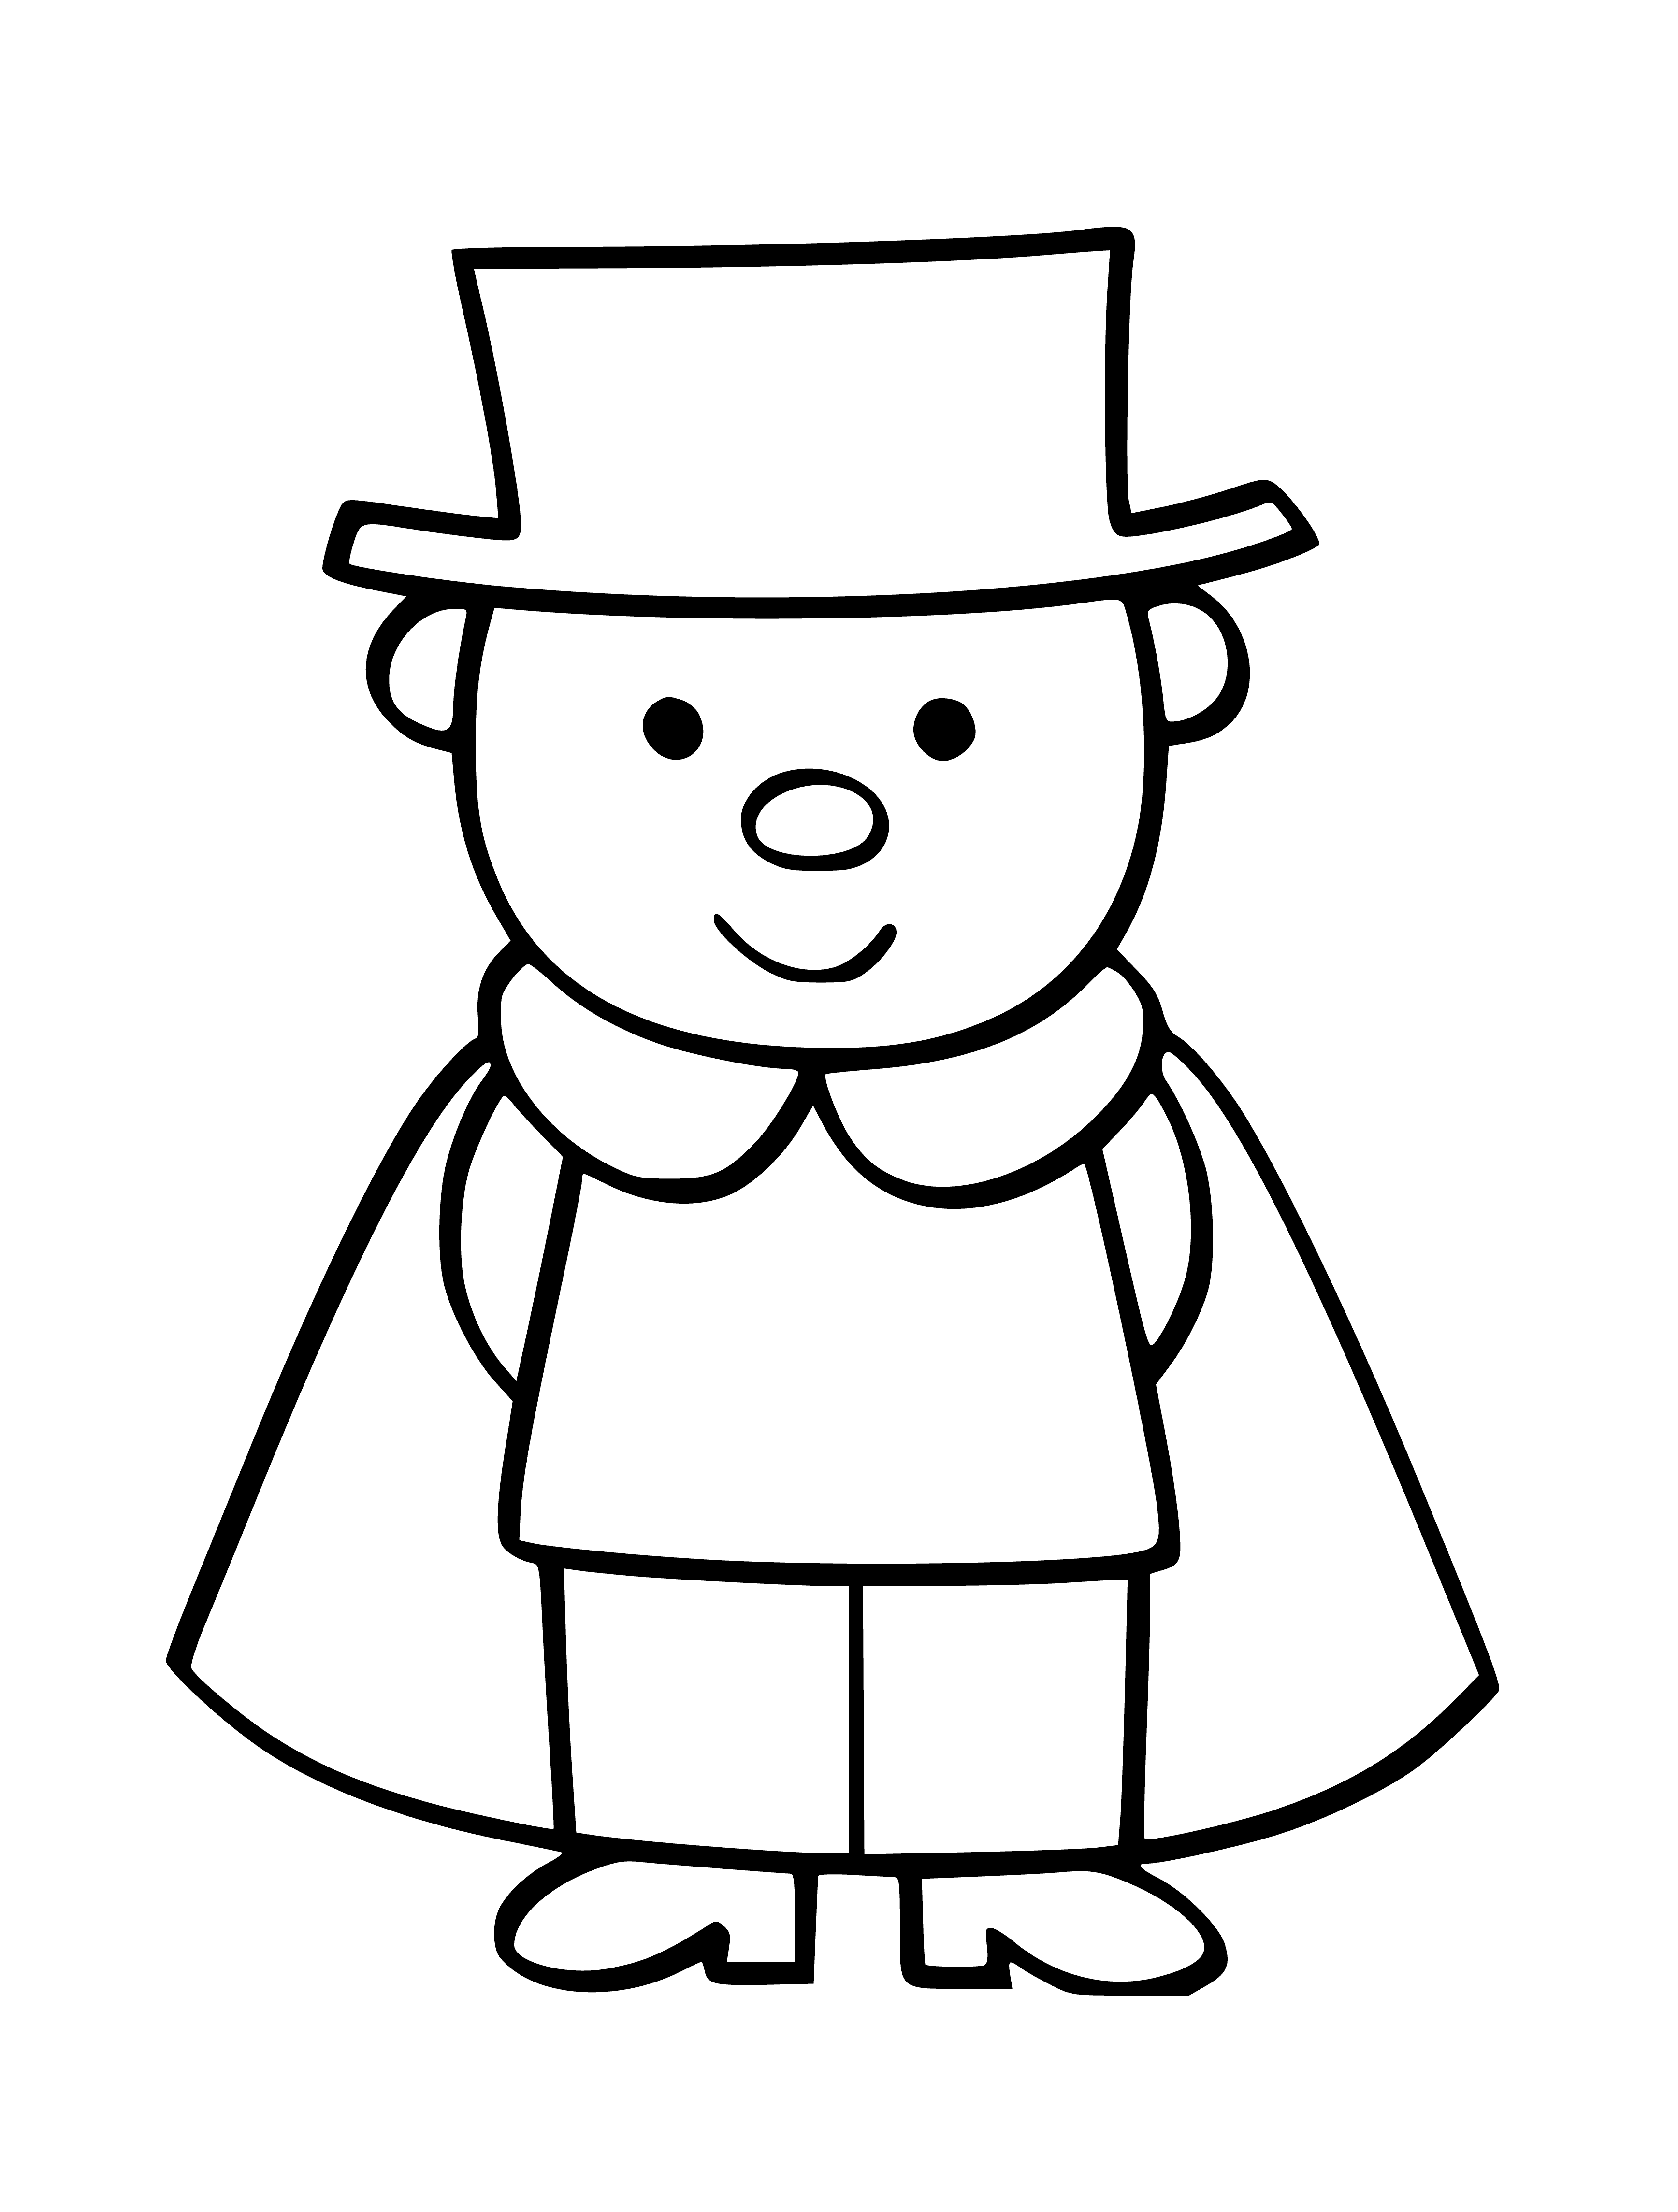 Fashionista coloring page